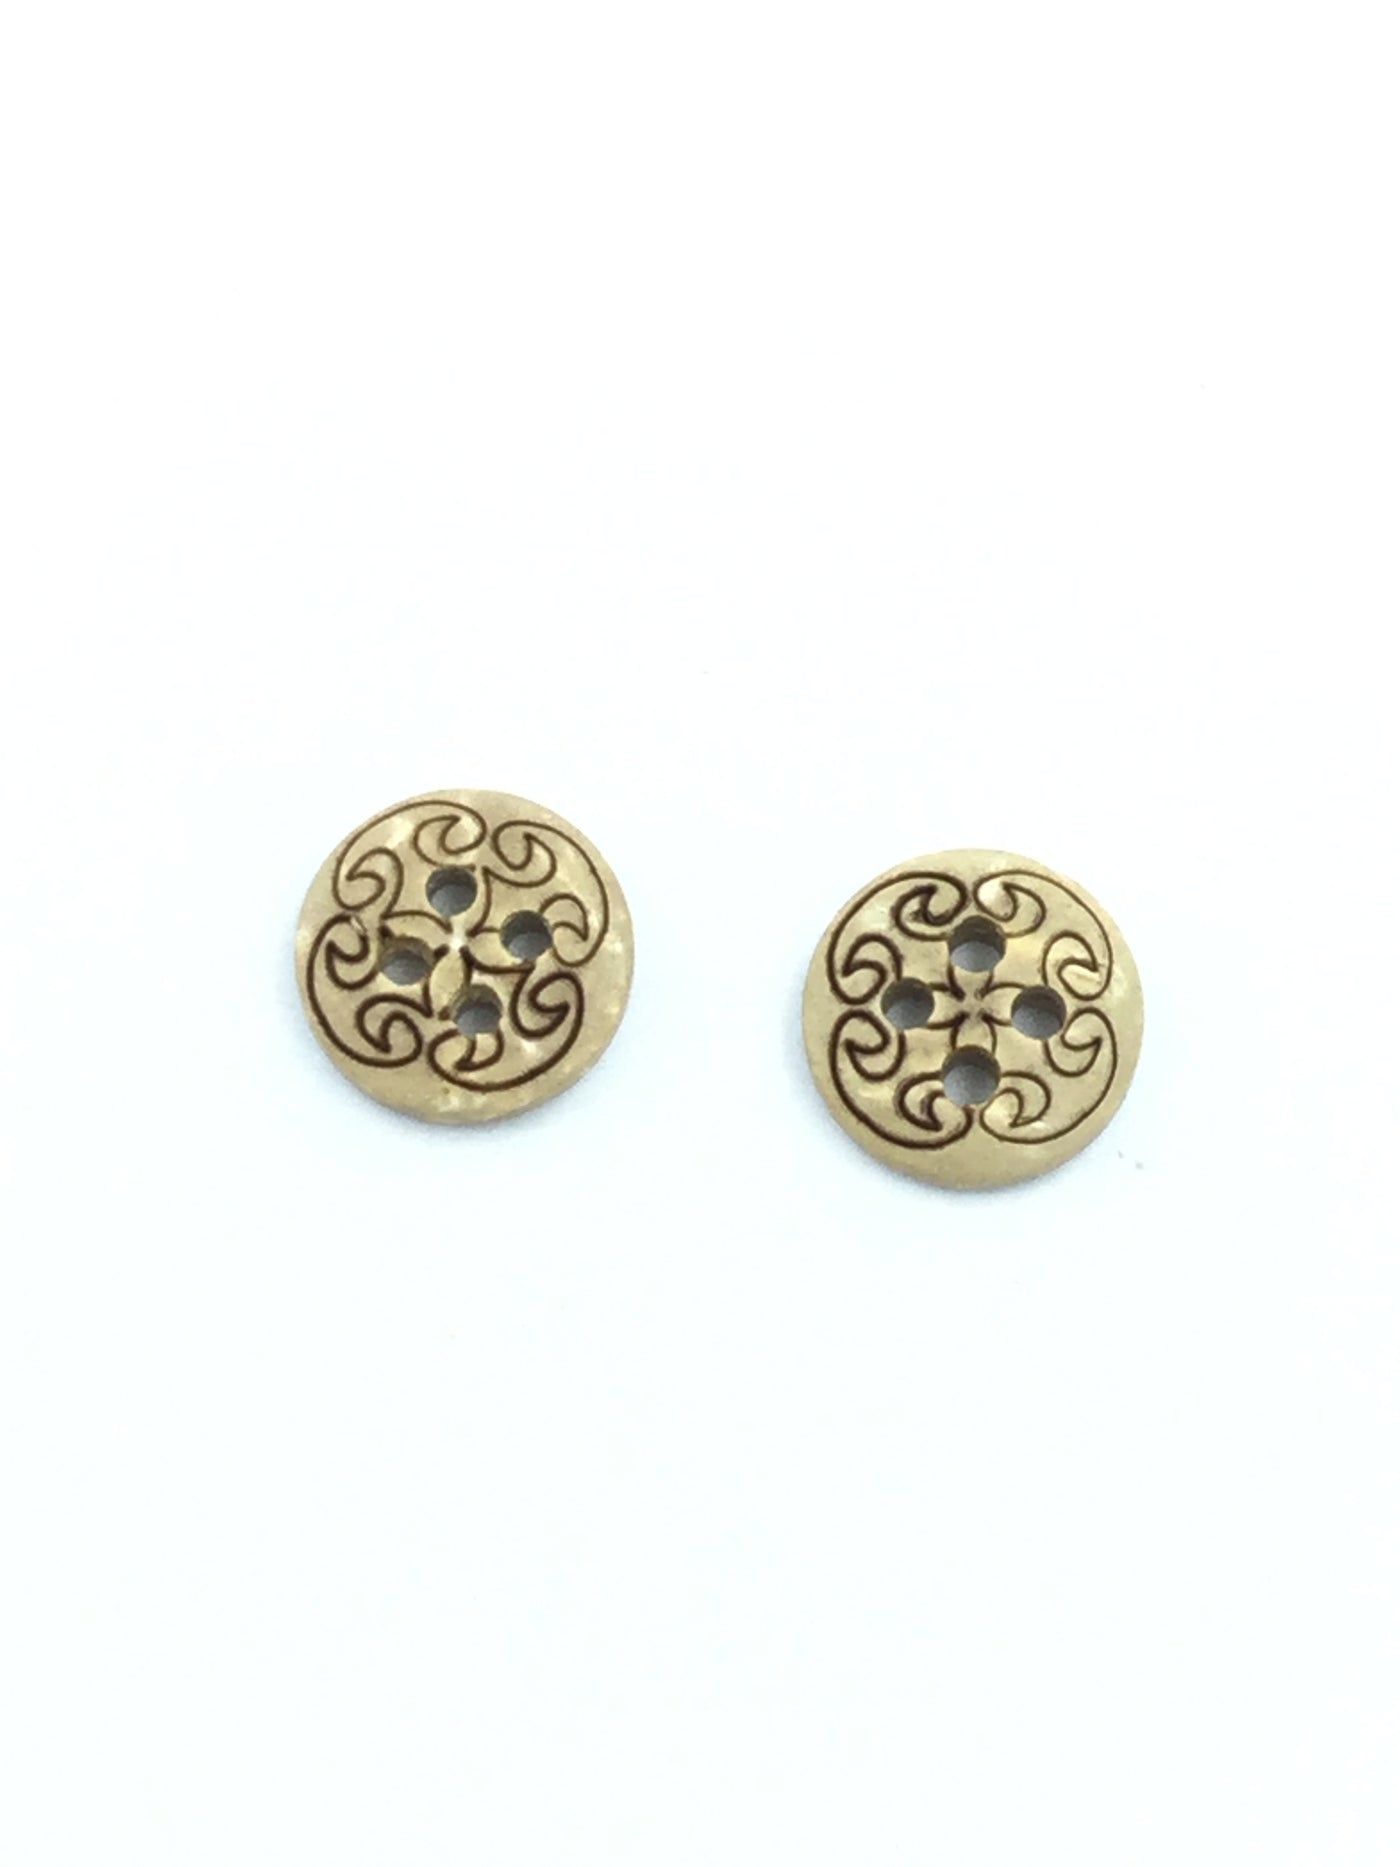 Off White 4 Hole Fancy  Wooden Button